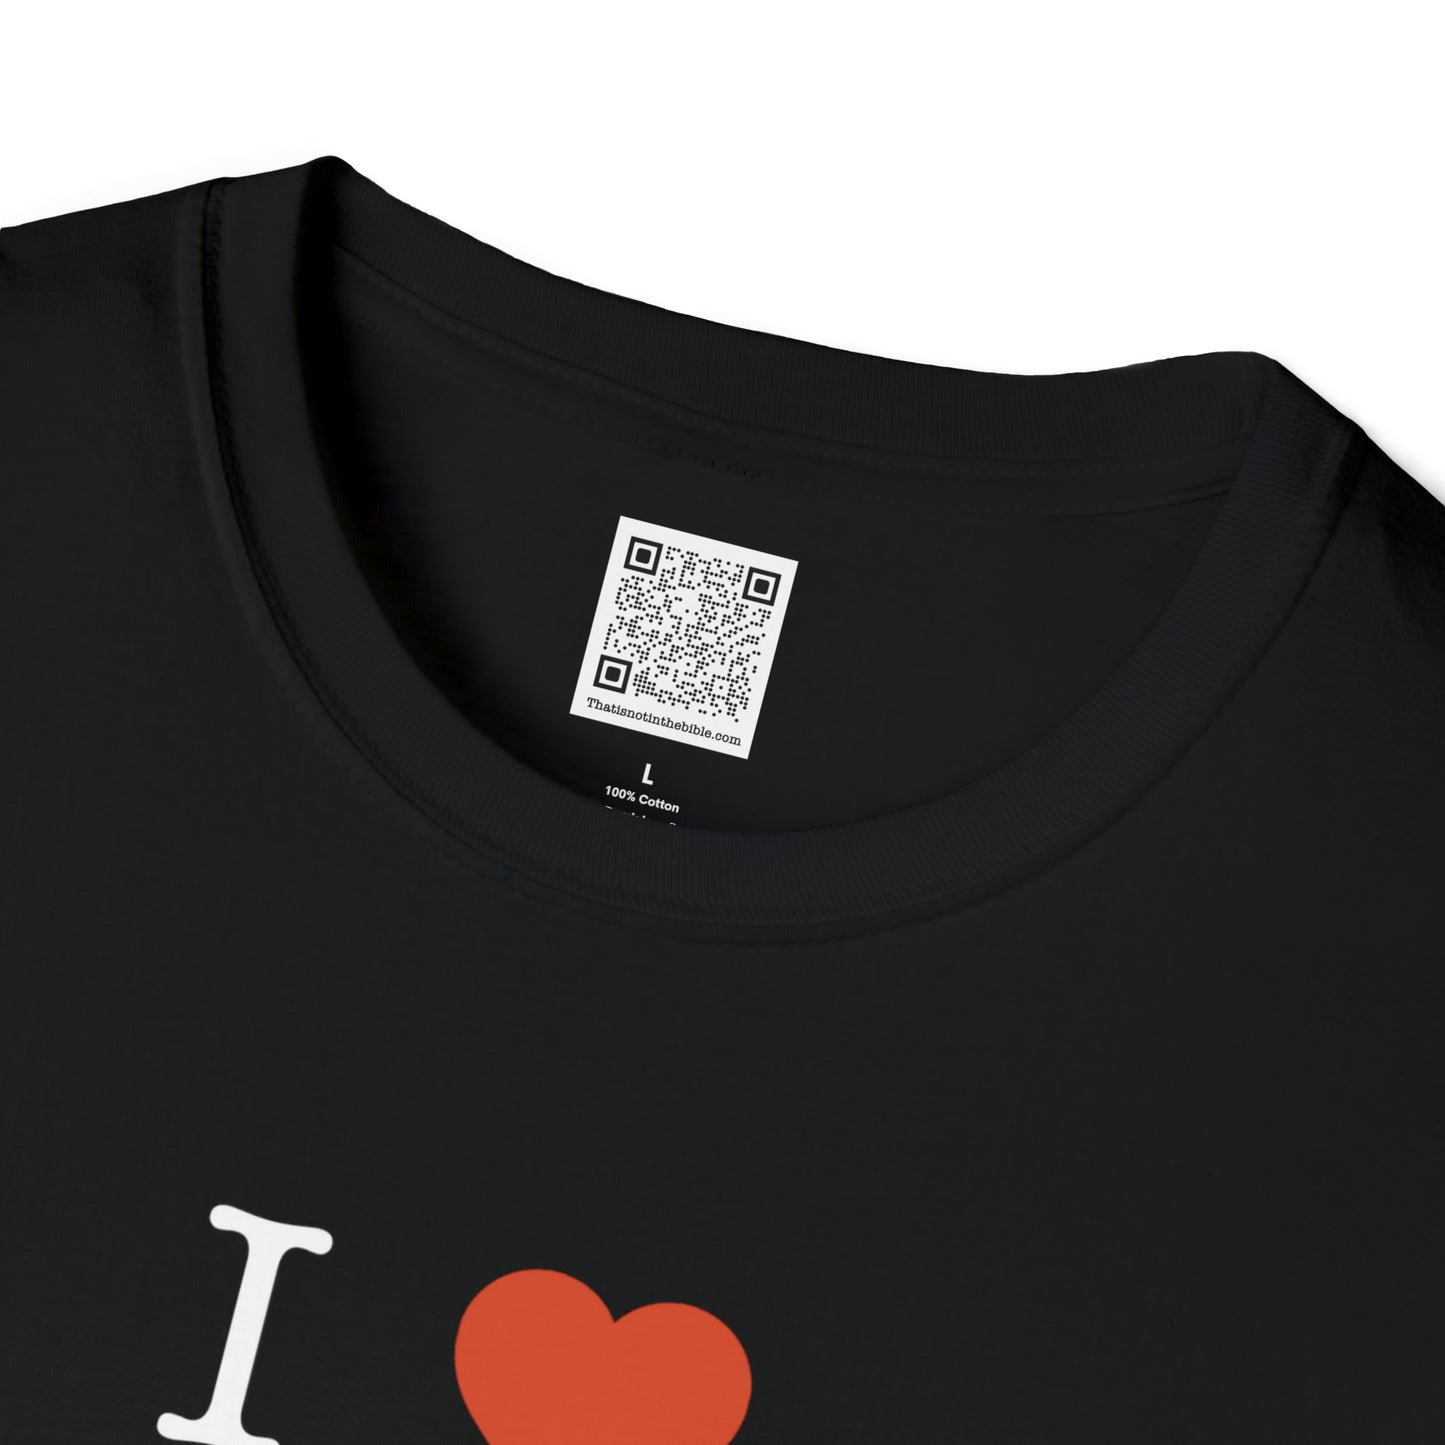 I Heart Weaknesses softstyle T-Shirt